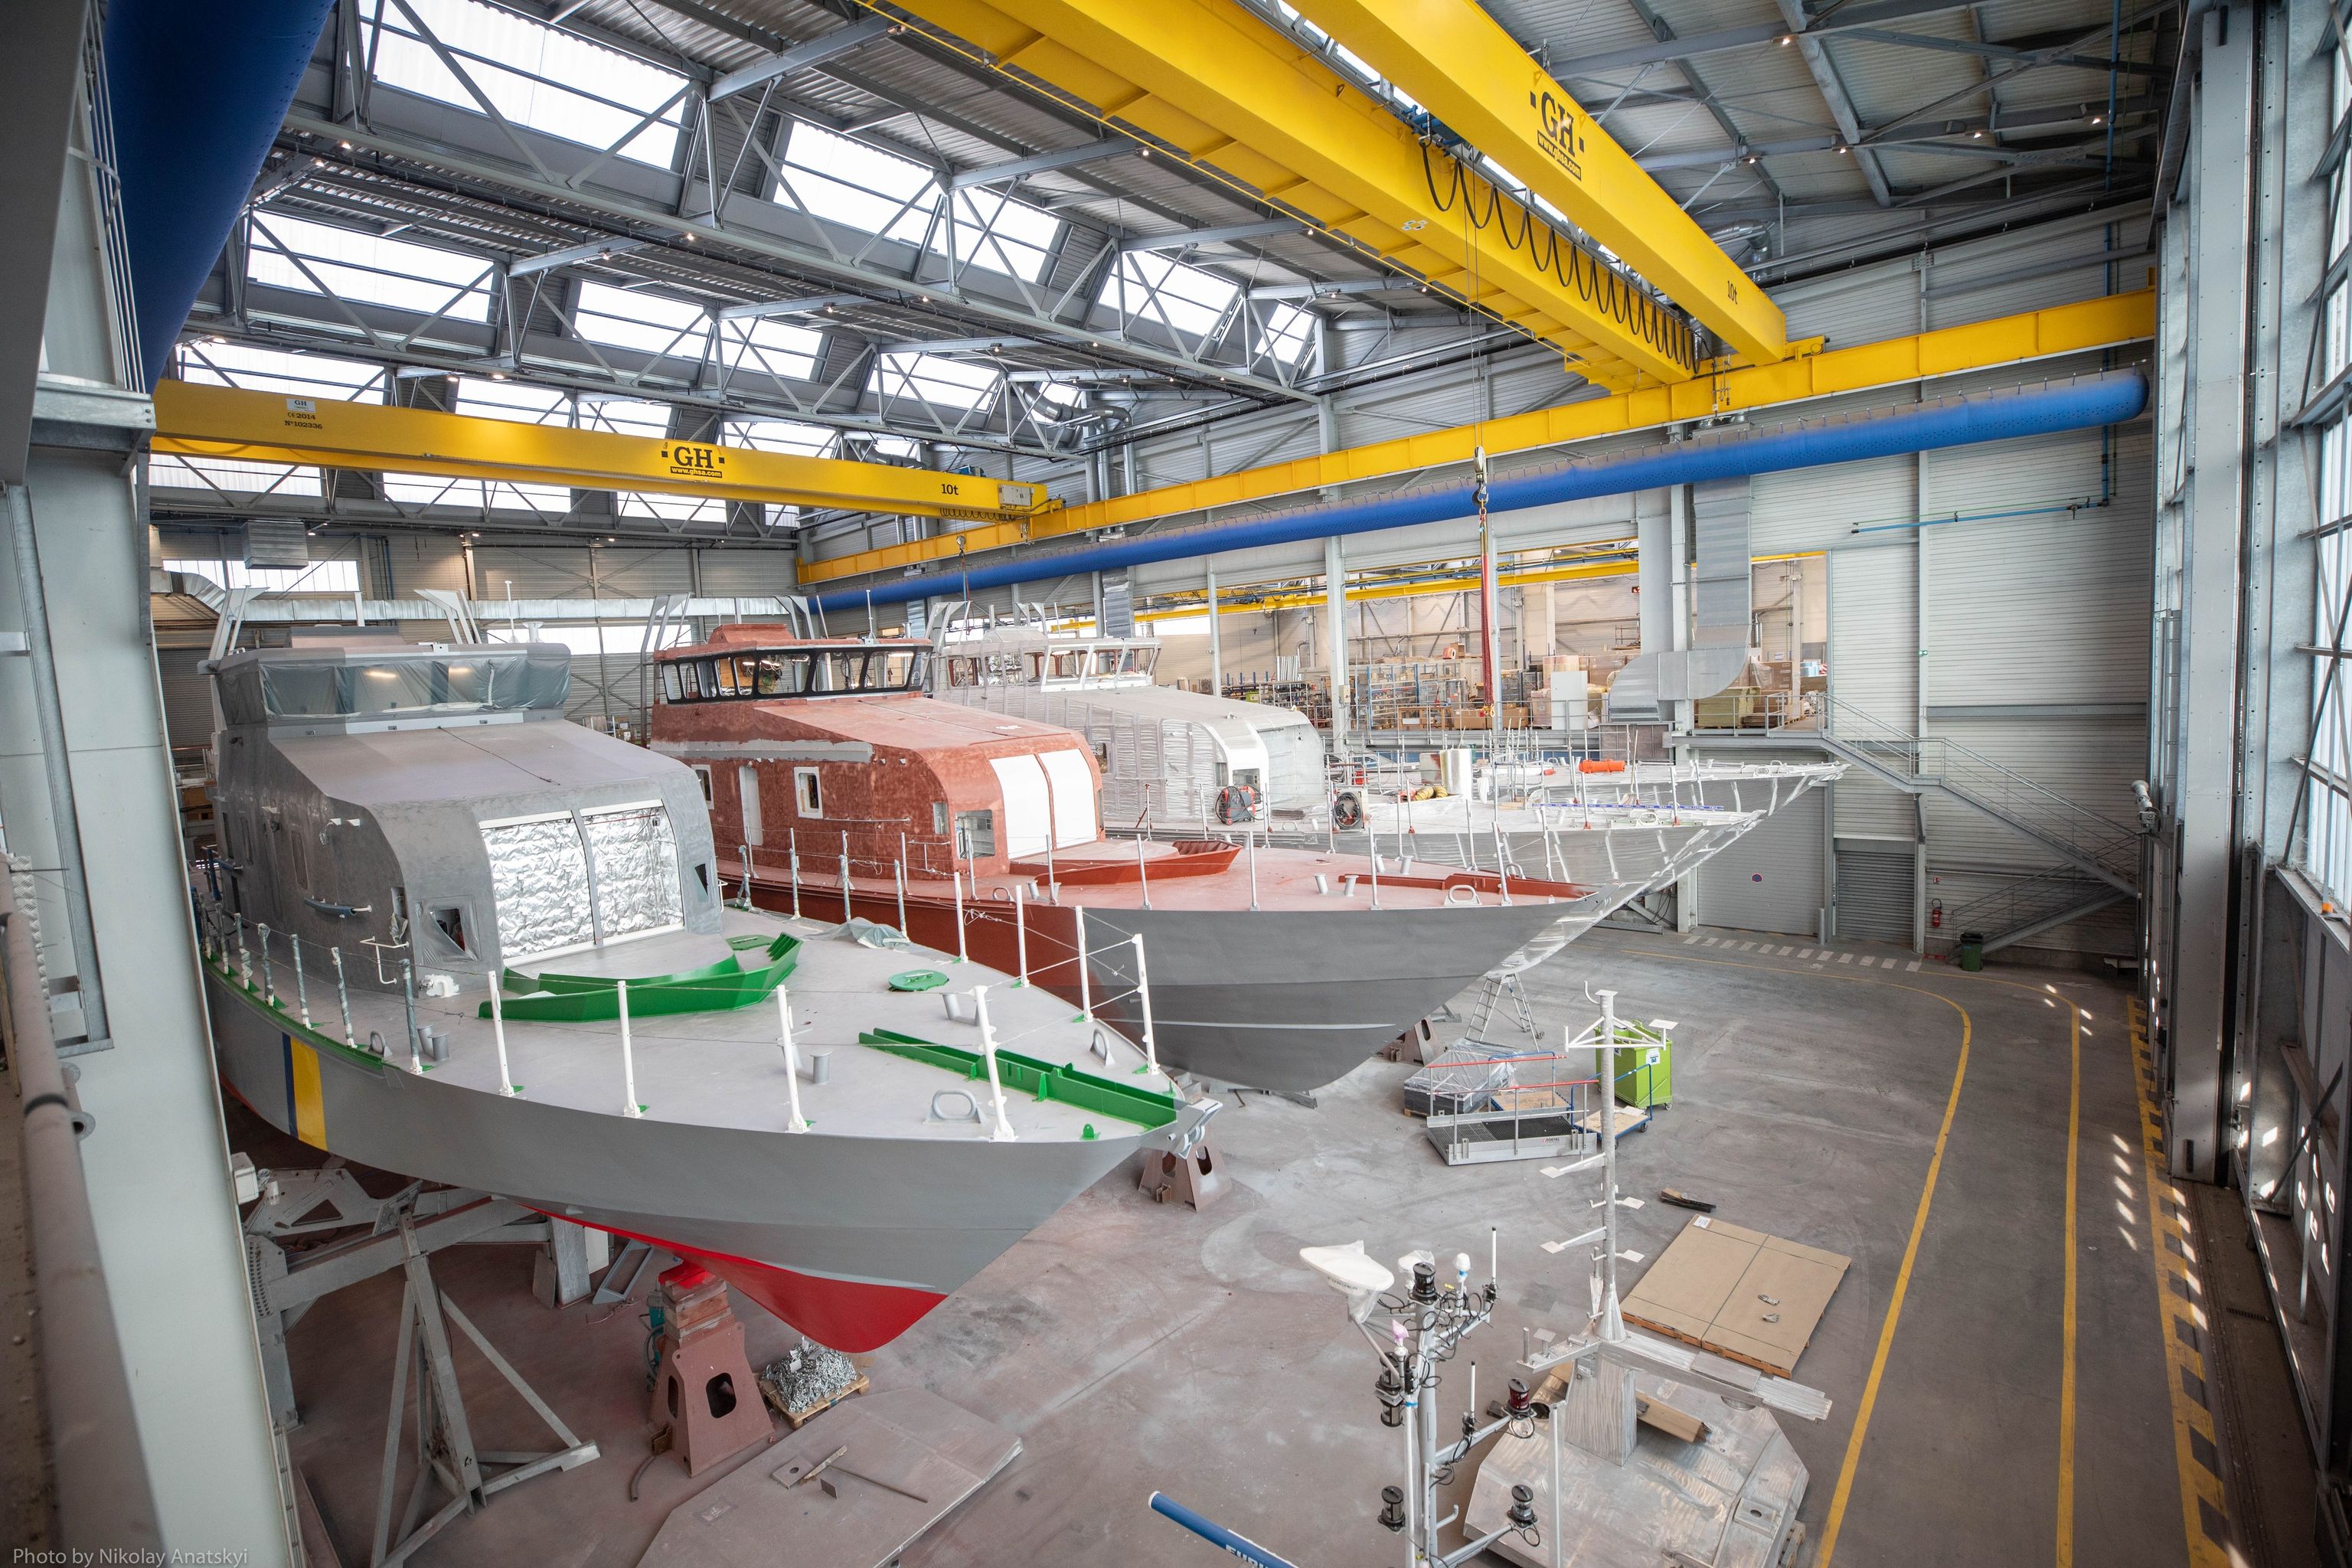 Ukrainian company signs €136.5 million contract with French shipbuilder